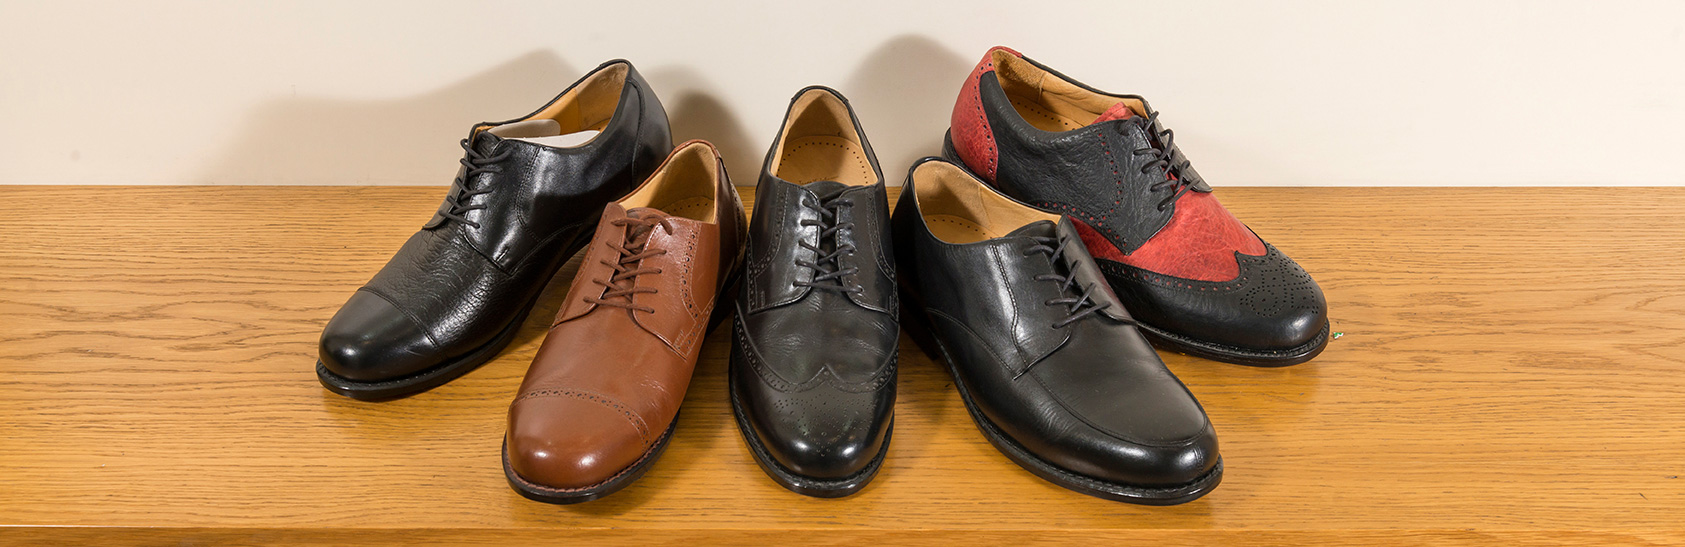 Men’s Shoes at Foot Solutions